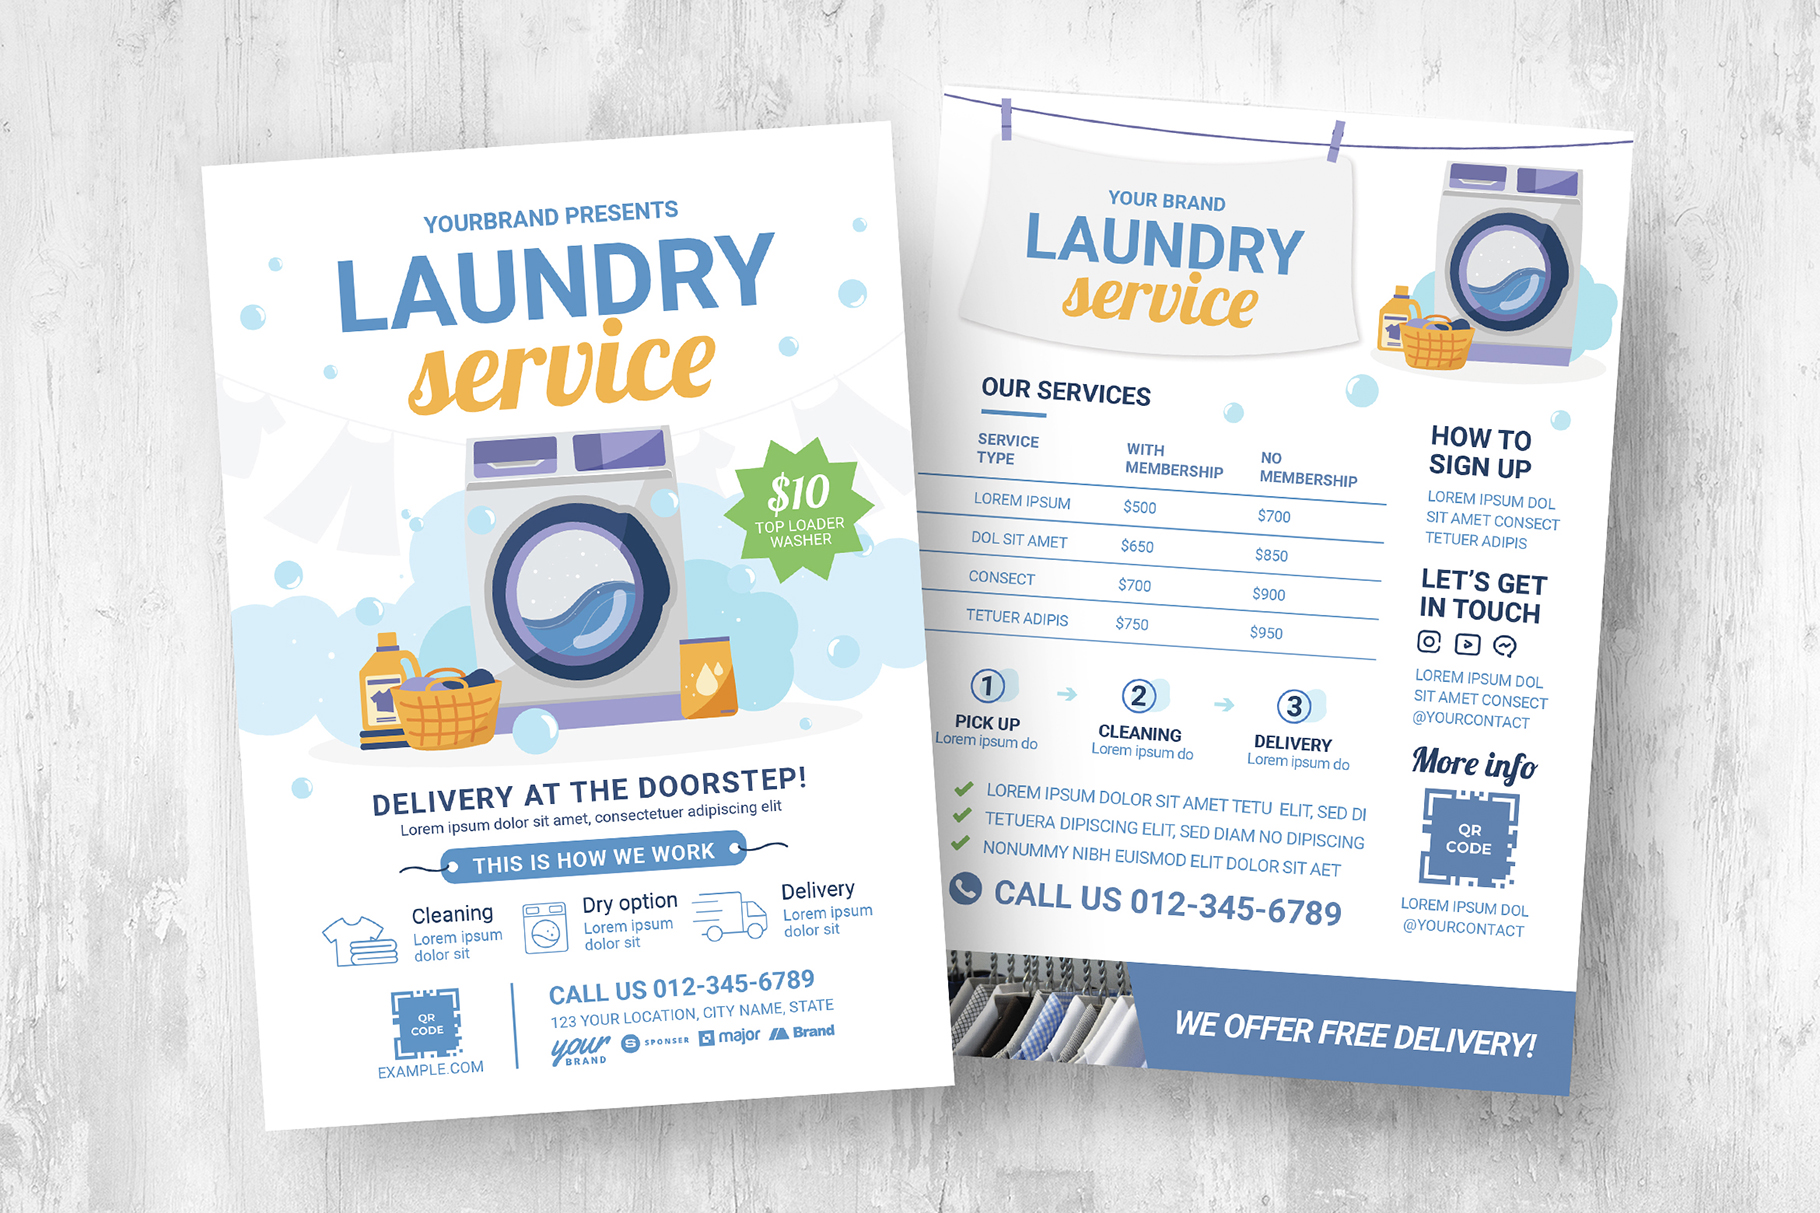 Laundry Service Flyer Template [PSD, Ai, Vector] - BrandPacks For Laundry Flyers Templates